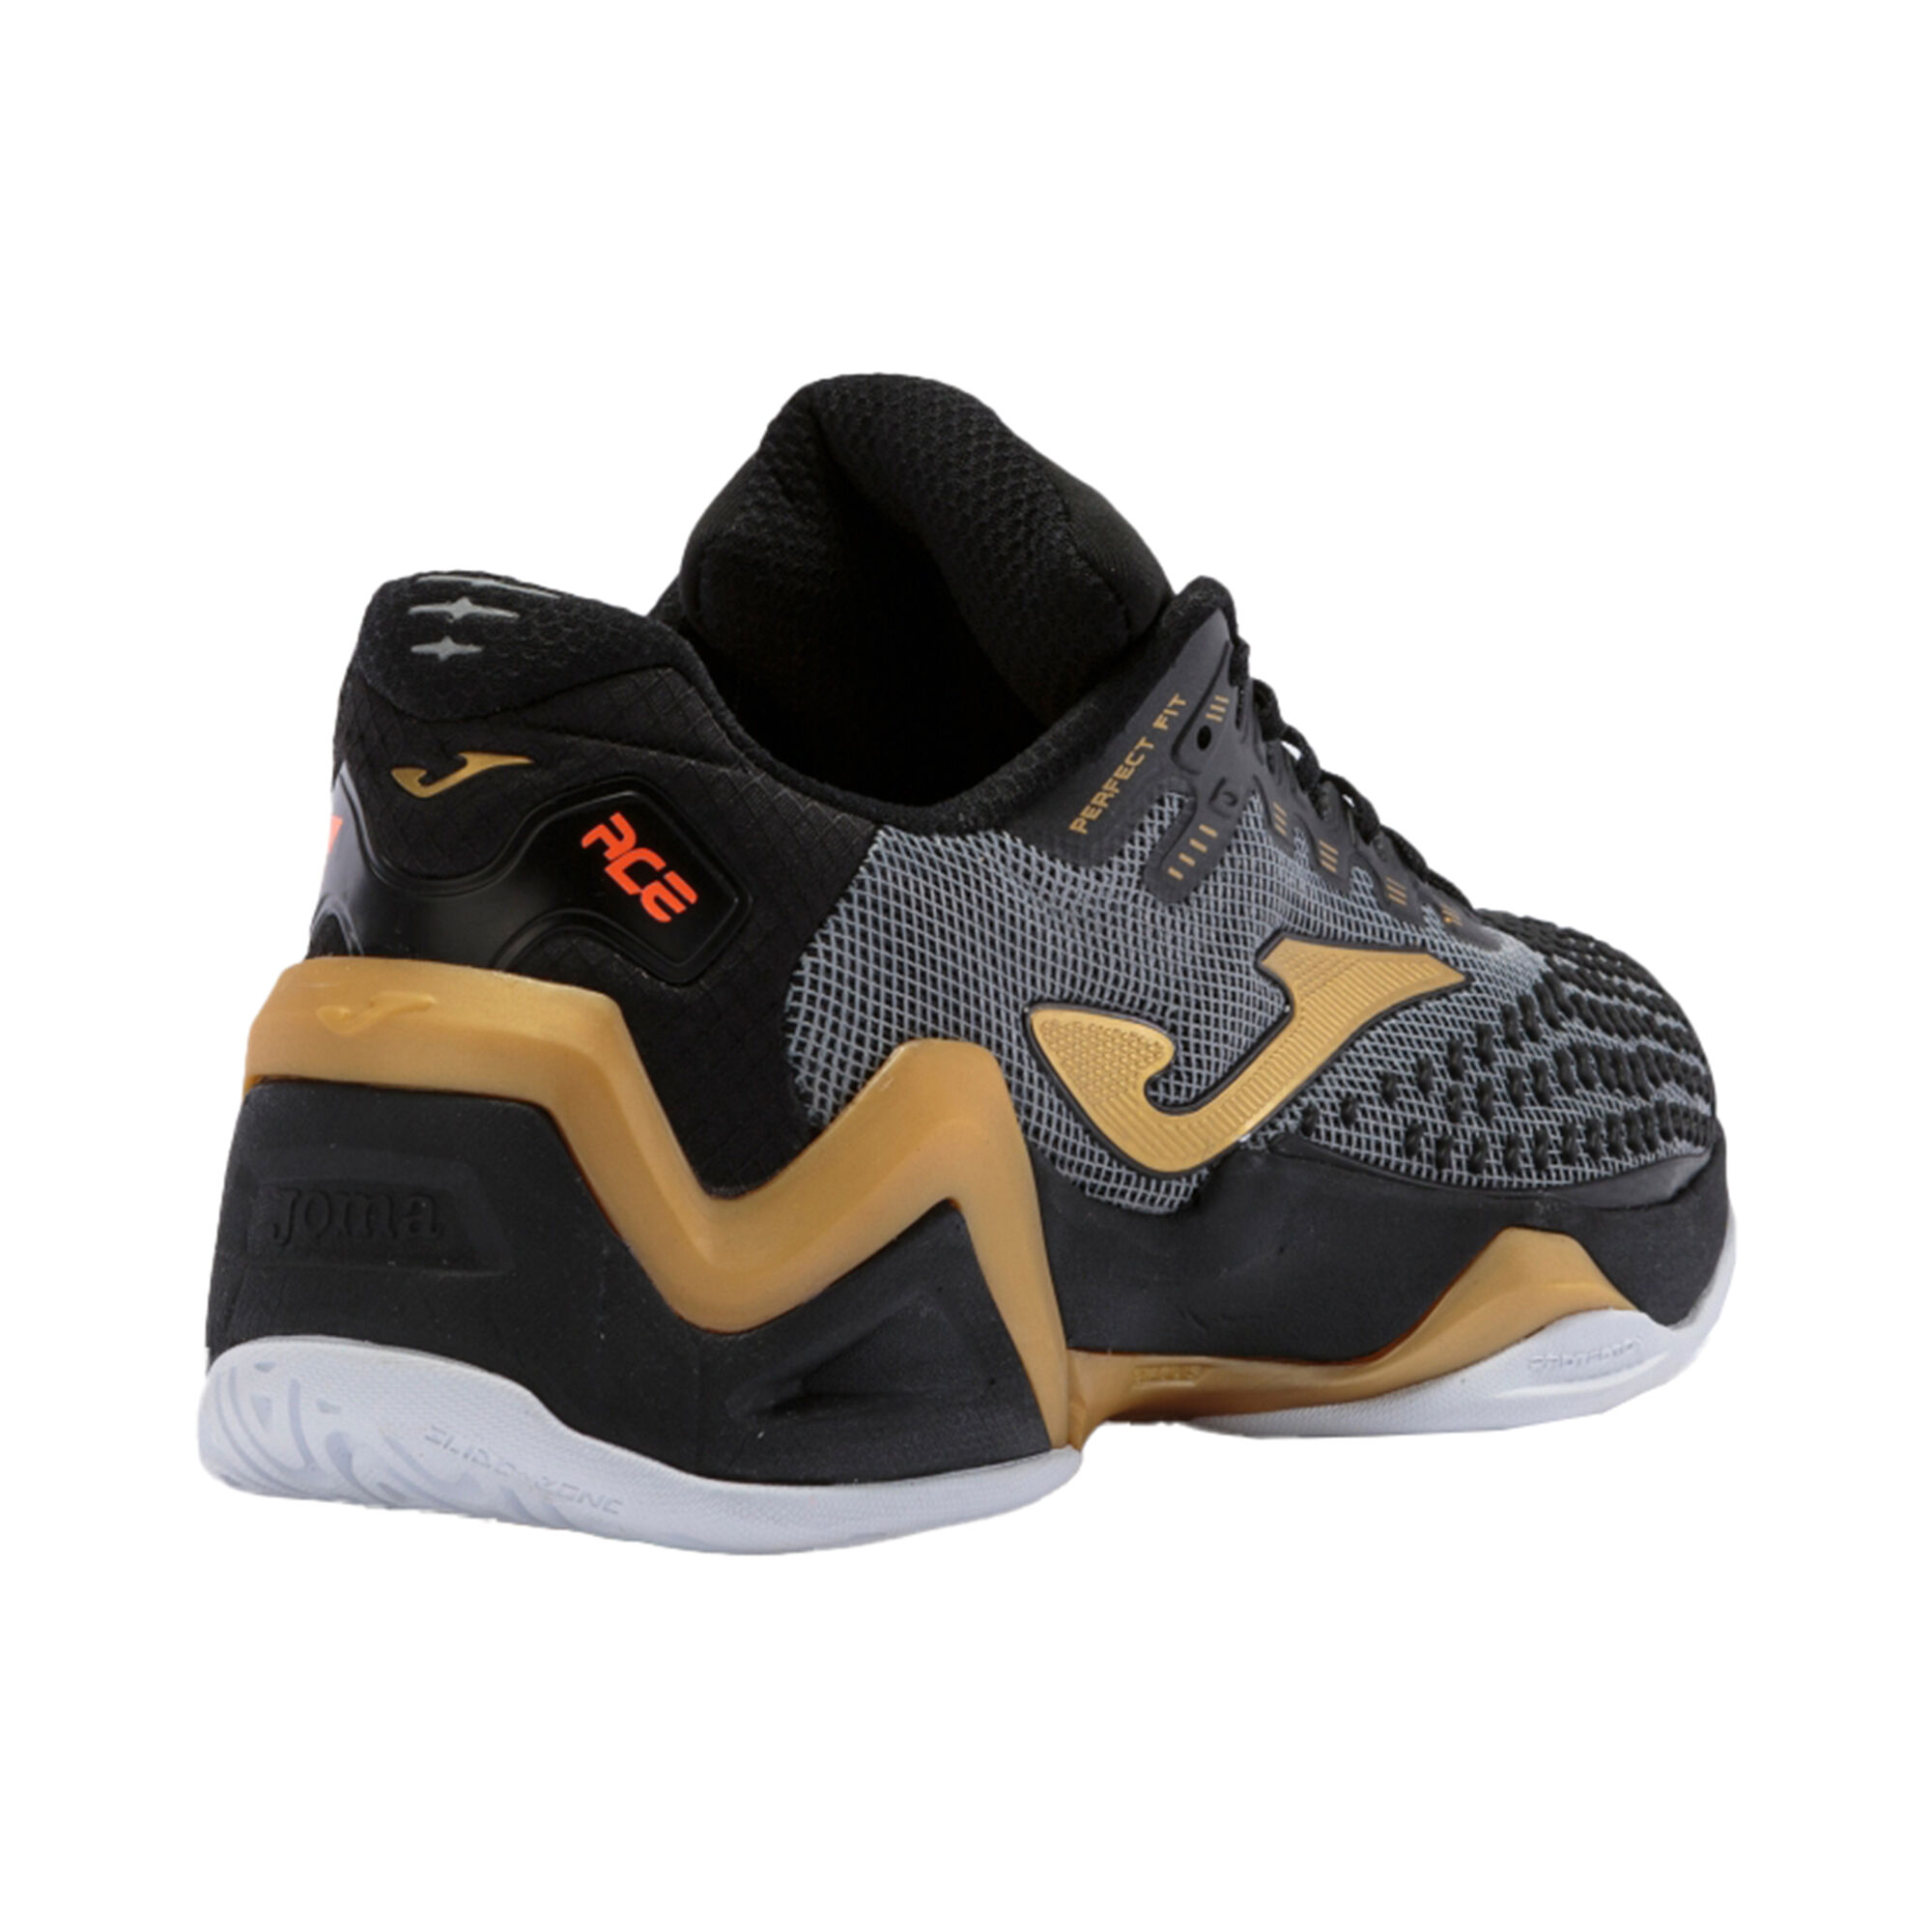 Rizo Fuerza Acurrucarse buy Joma Ace Pro Clay Court Shoe Men - Black, Gold online | Tennis-Point